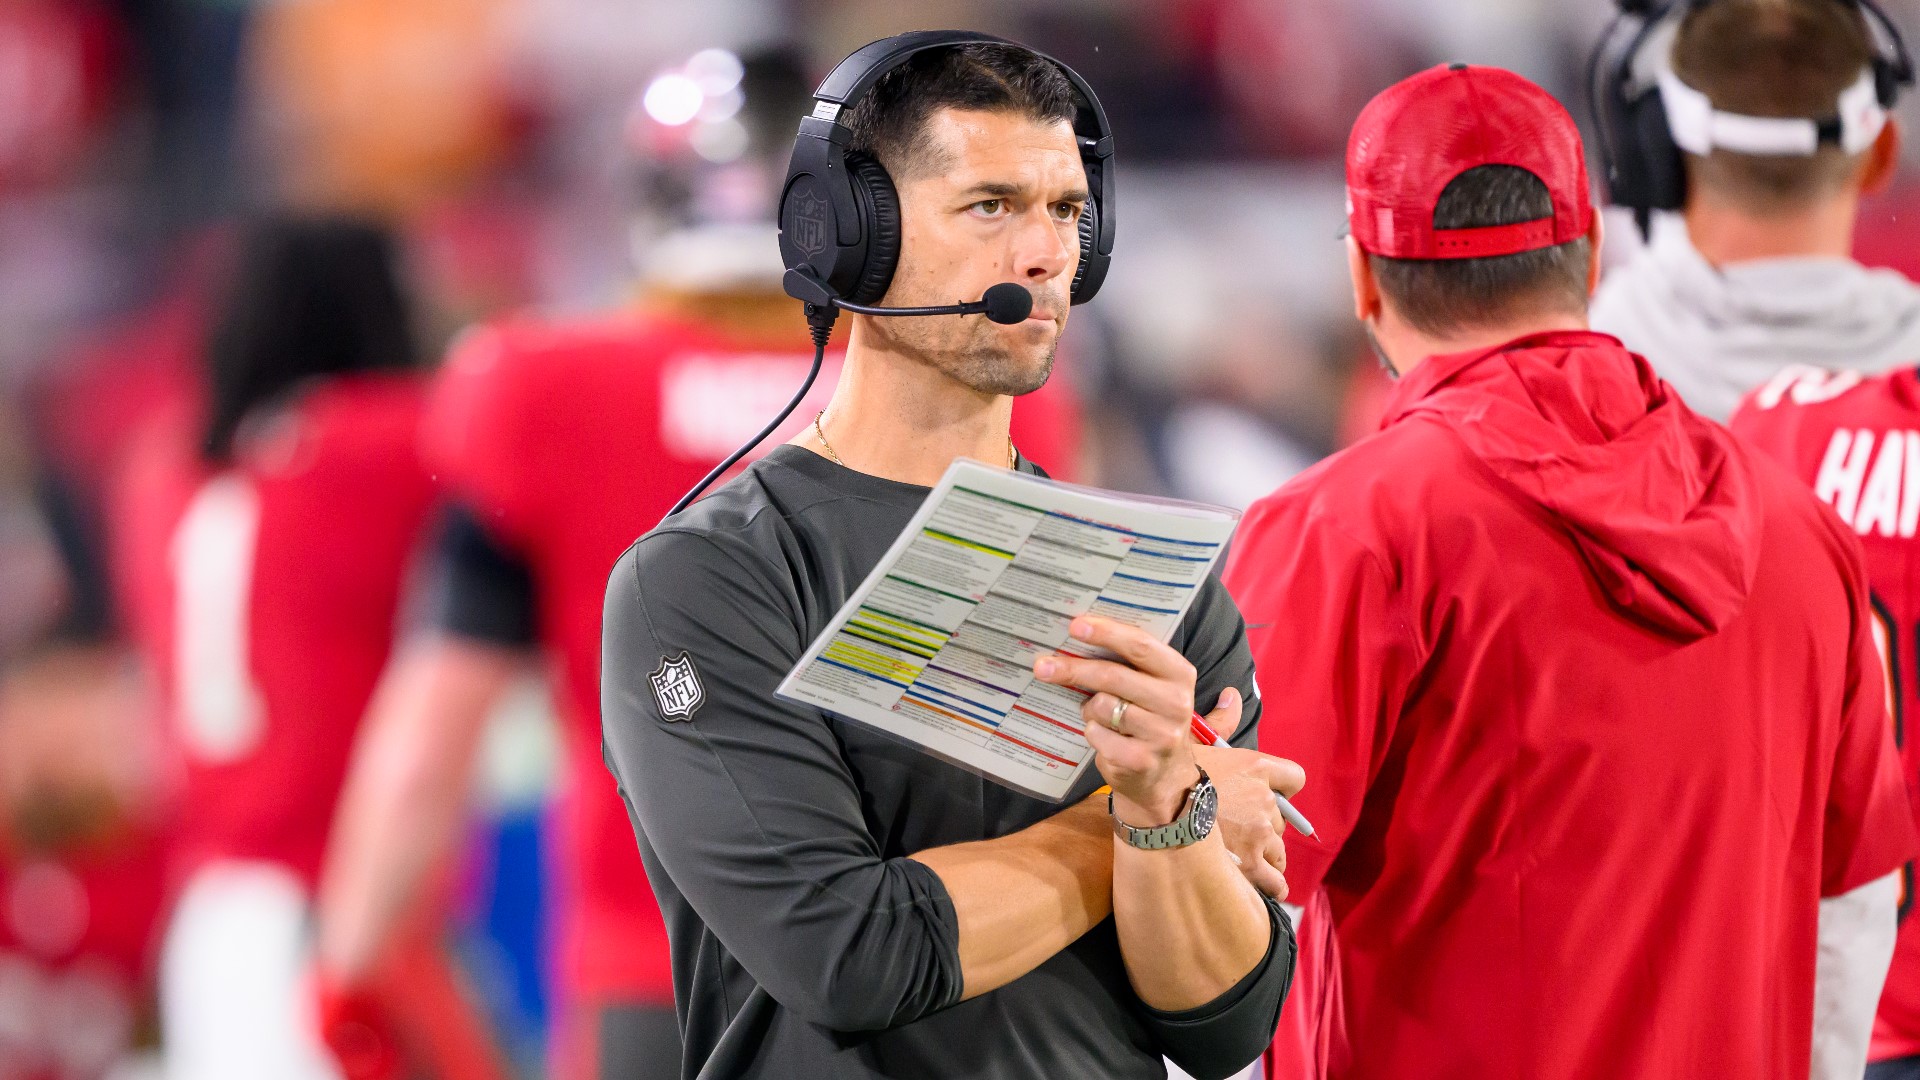 Dave Canales worked as offensive coordinator for the Tampa Bay Buccaneers.